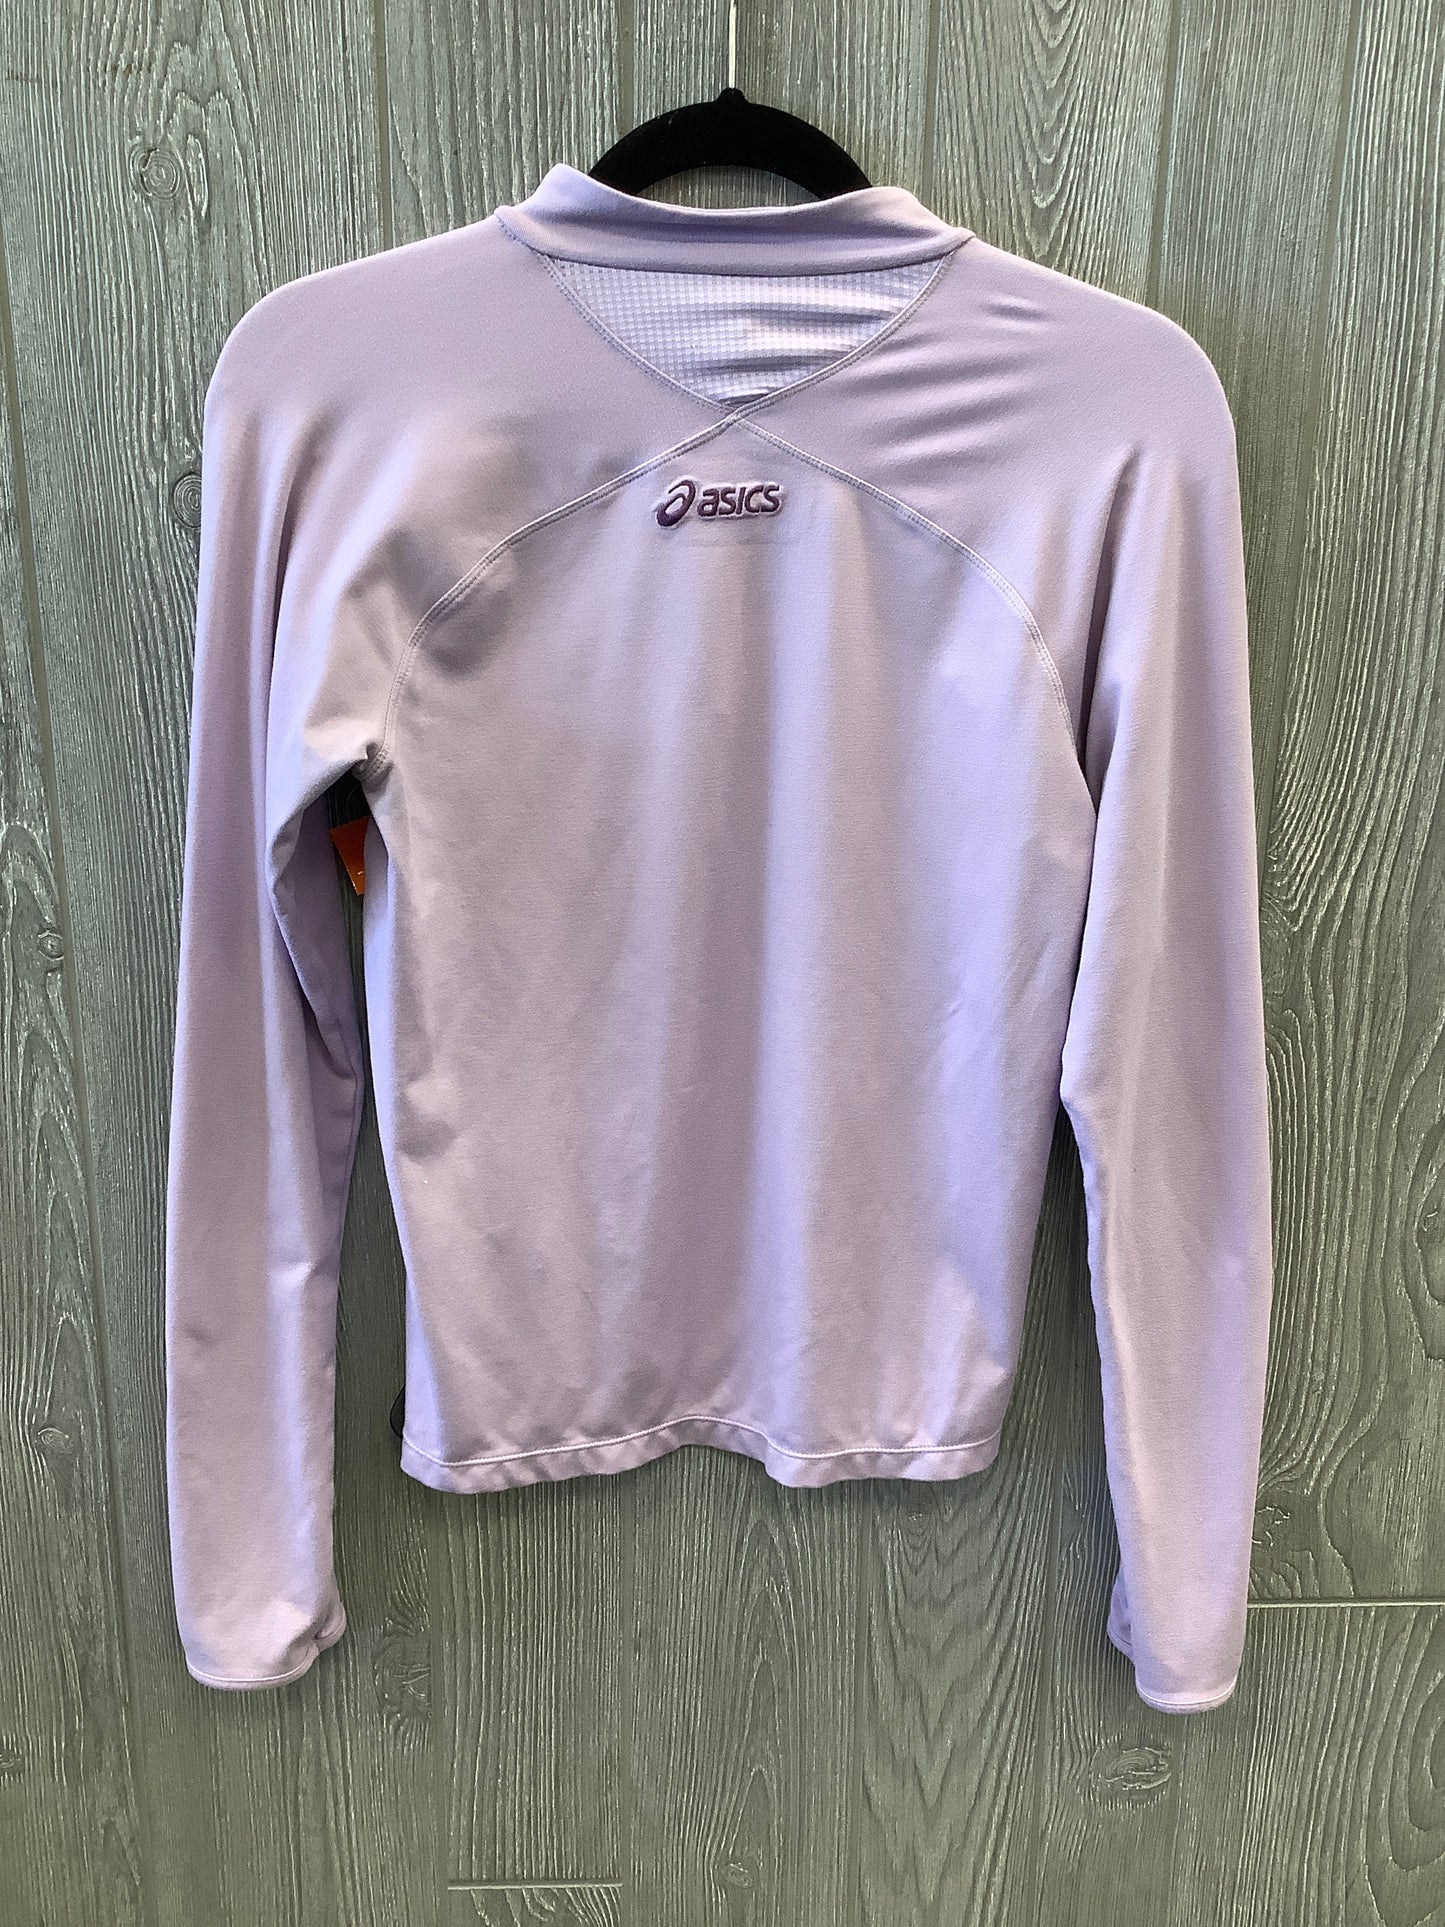 Athletic Top Long Sleeve Collar By Asics  Size: S